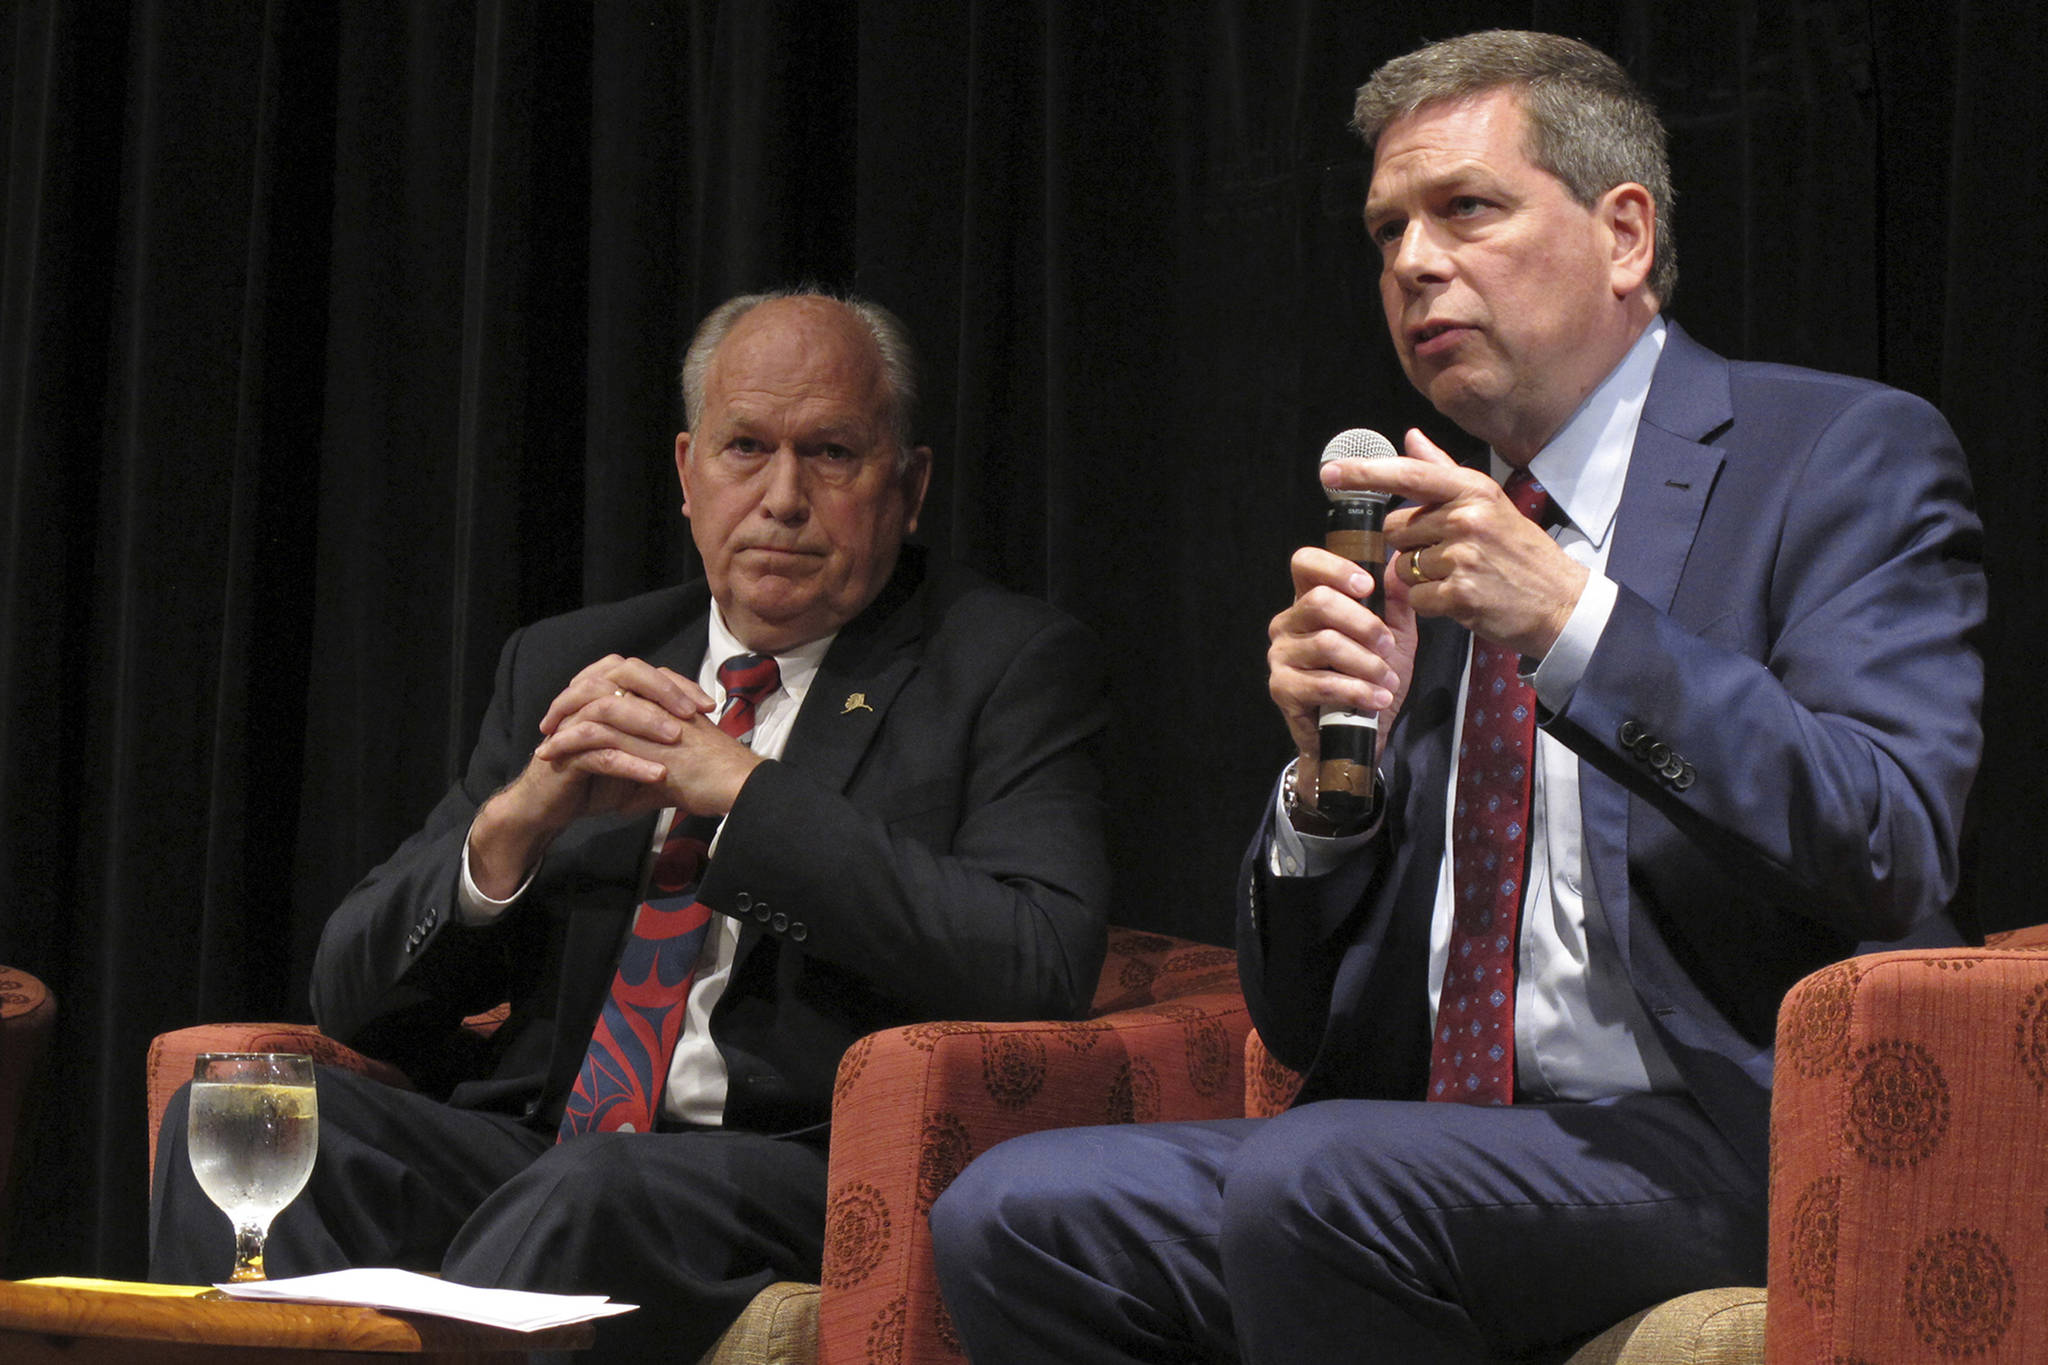 In this Sept. 6, 2018 file photo, Democratic nominee for governor of Alaska Mark Begich, right, speaks as Gov. Bill Walker listens during a chamber of commerce gubernatorial candidate forum on Thursday, Sept. 6, 2018, in Juneau, Alaska, On Friday, Oct. 19, Walker announced he was dropping his bid for re-election, though his name remains on the ballot. He threw his support behind Begich, who will face Republican Mike Dunleavy in November. (AP Photo | Becky Bohrer File)